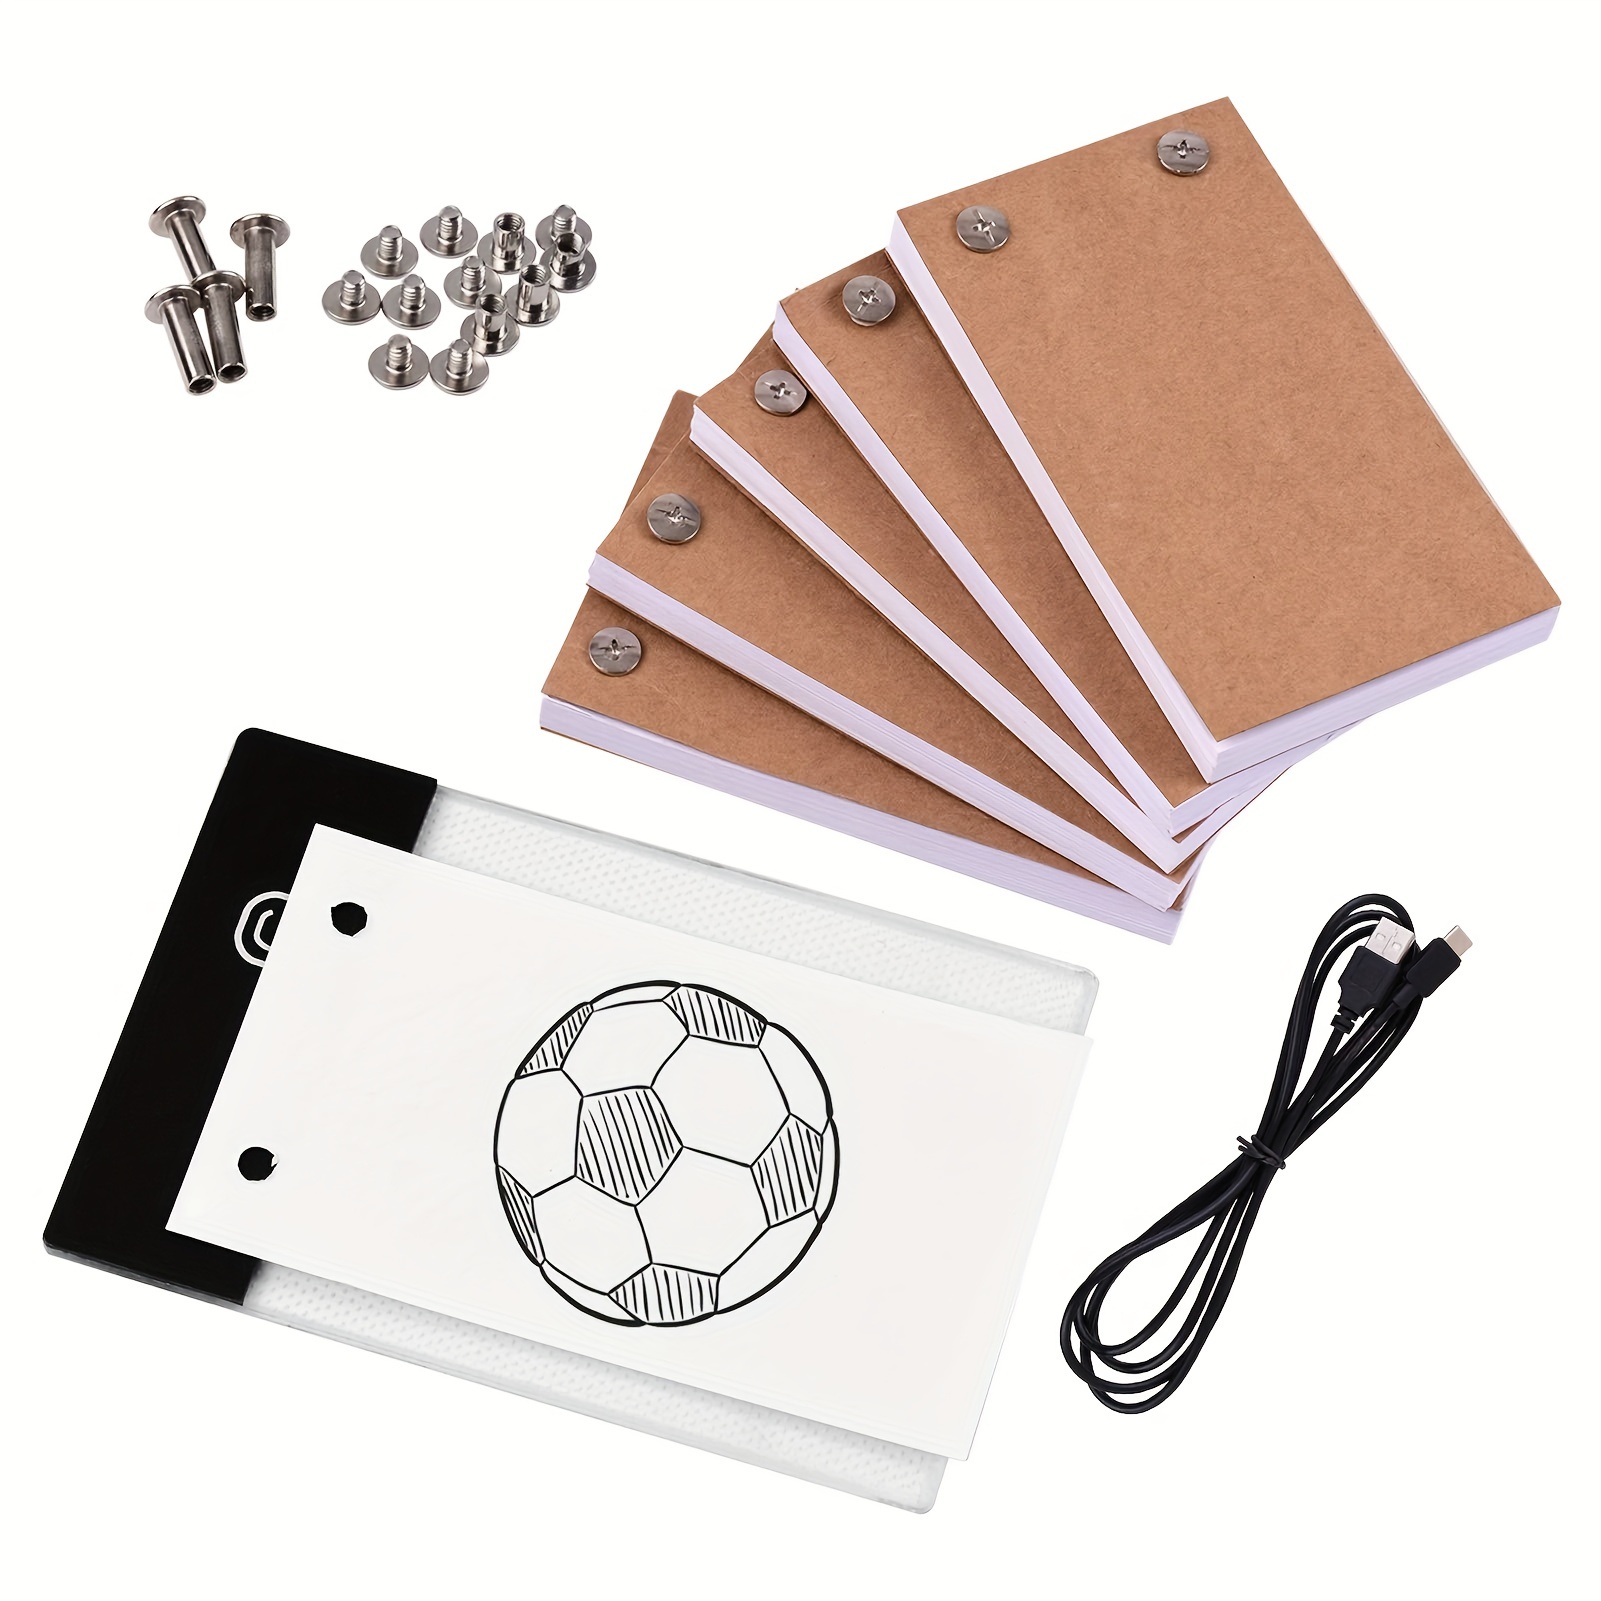 Blank Flip Book Paper with Holes - 240 Sheets (480 Pages) Flipbook  Animation Paper : Works with Flip Book Kit Light Pads : for Drawing,  Sketching Supplies/Comic Book Kit - Drawing Paper Animation Kit